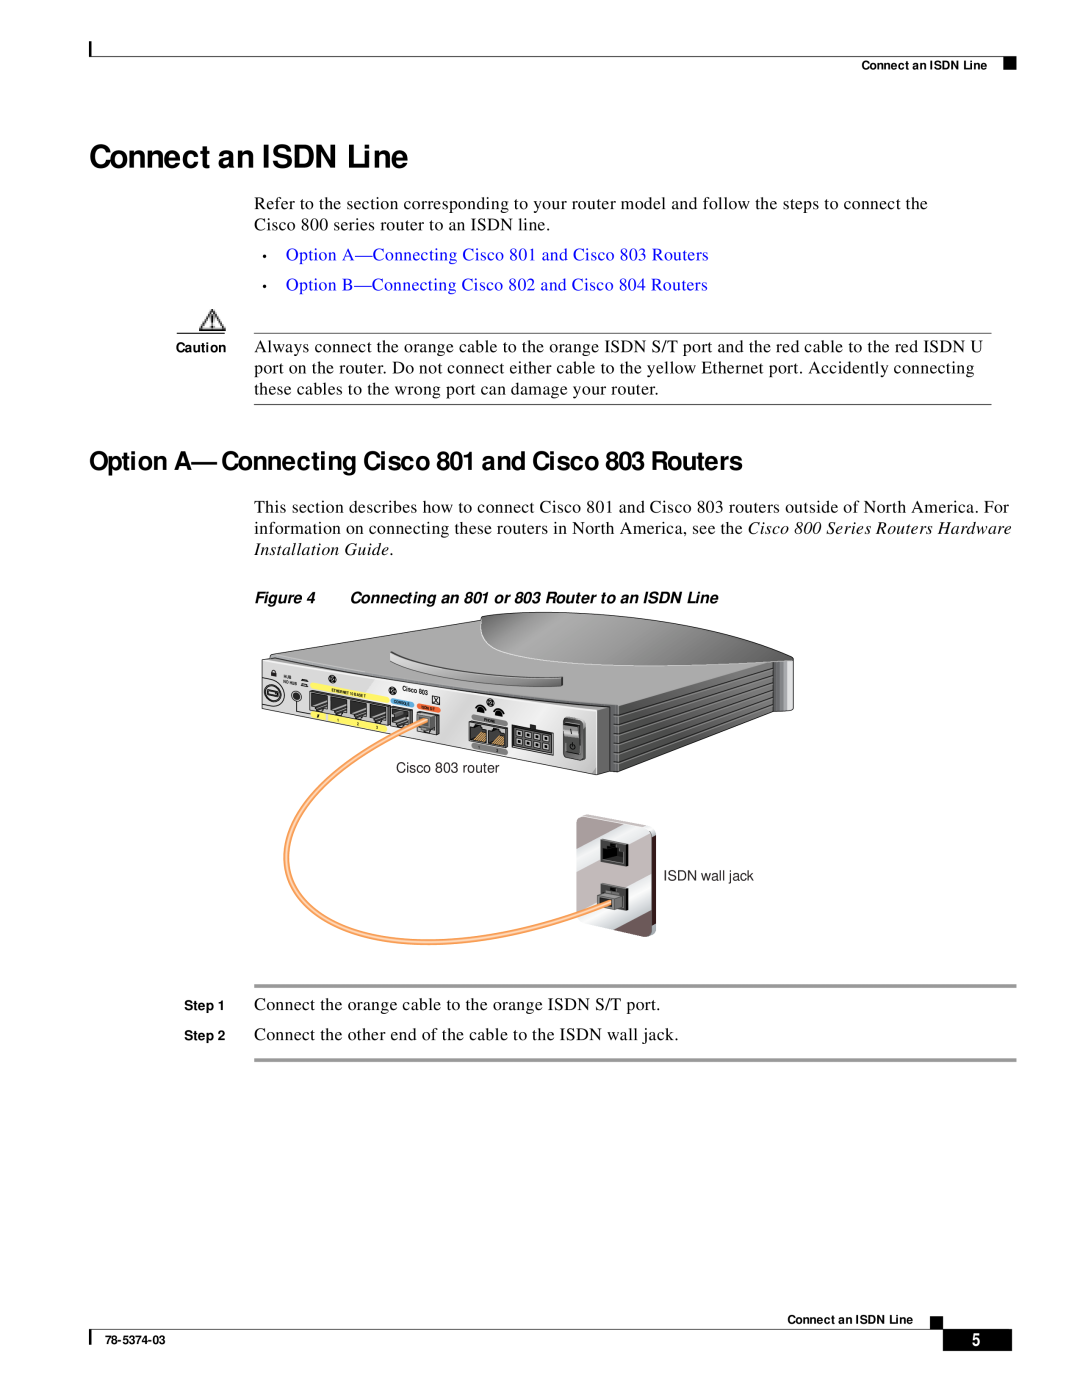 Cisco Systems 2800 Series quick start Connect an ISDN Line, Option A-Connecting Cisco 801 and Cisco 803 Routers 